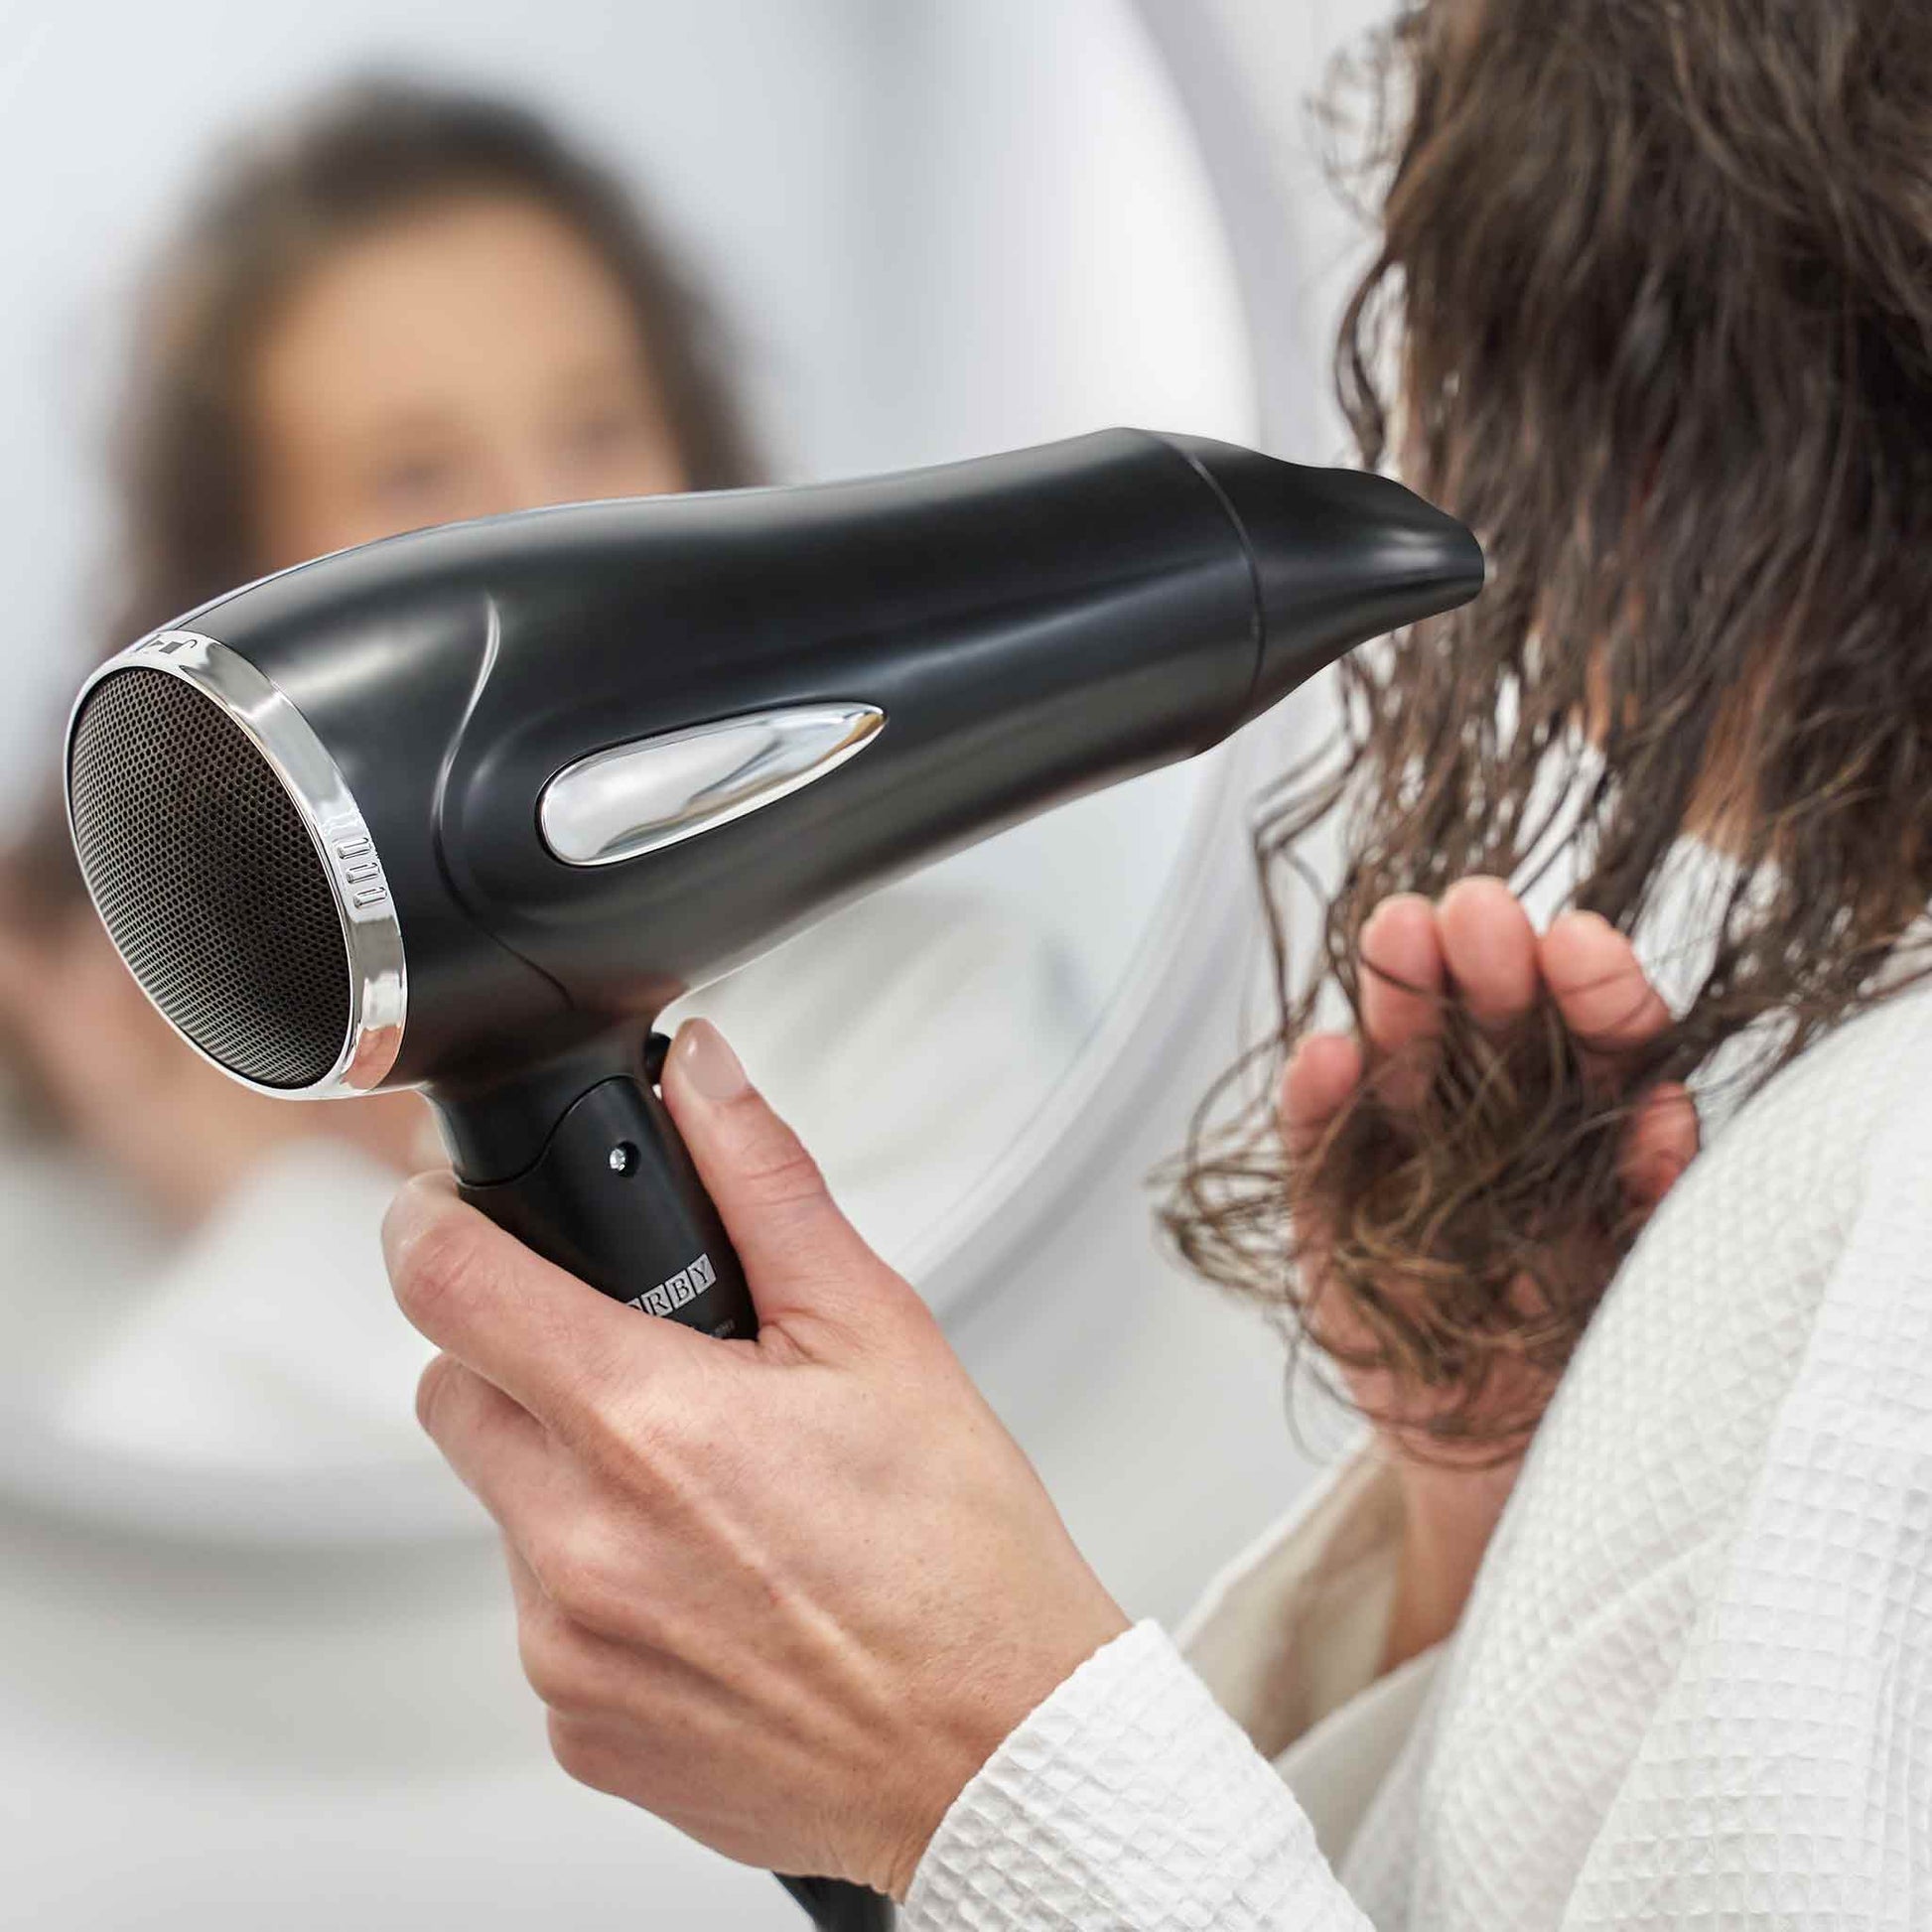 Corby Bedford hairdryer being used by hotel guest